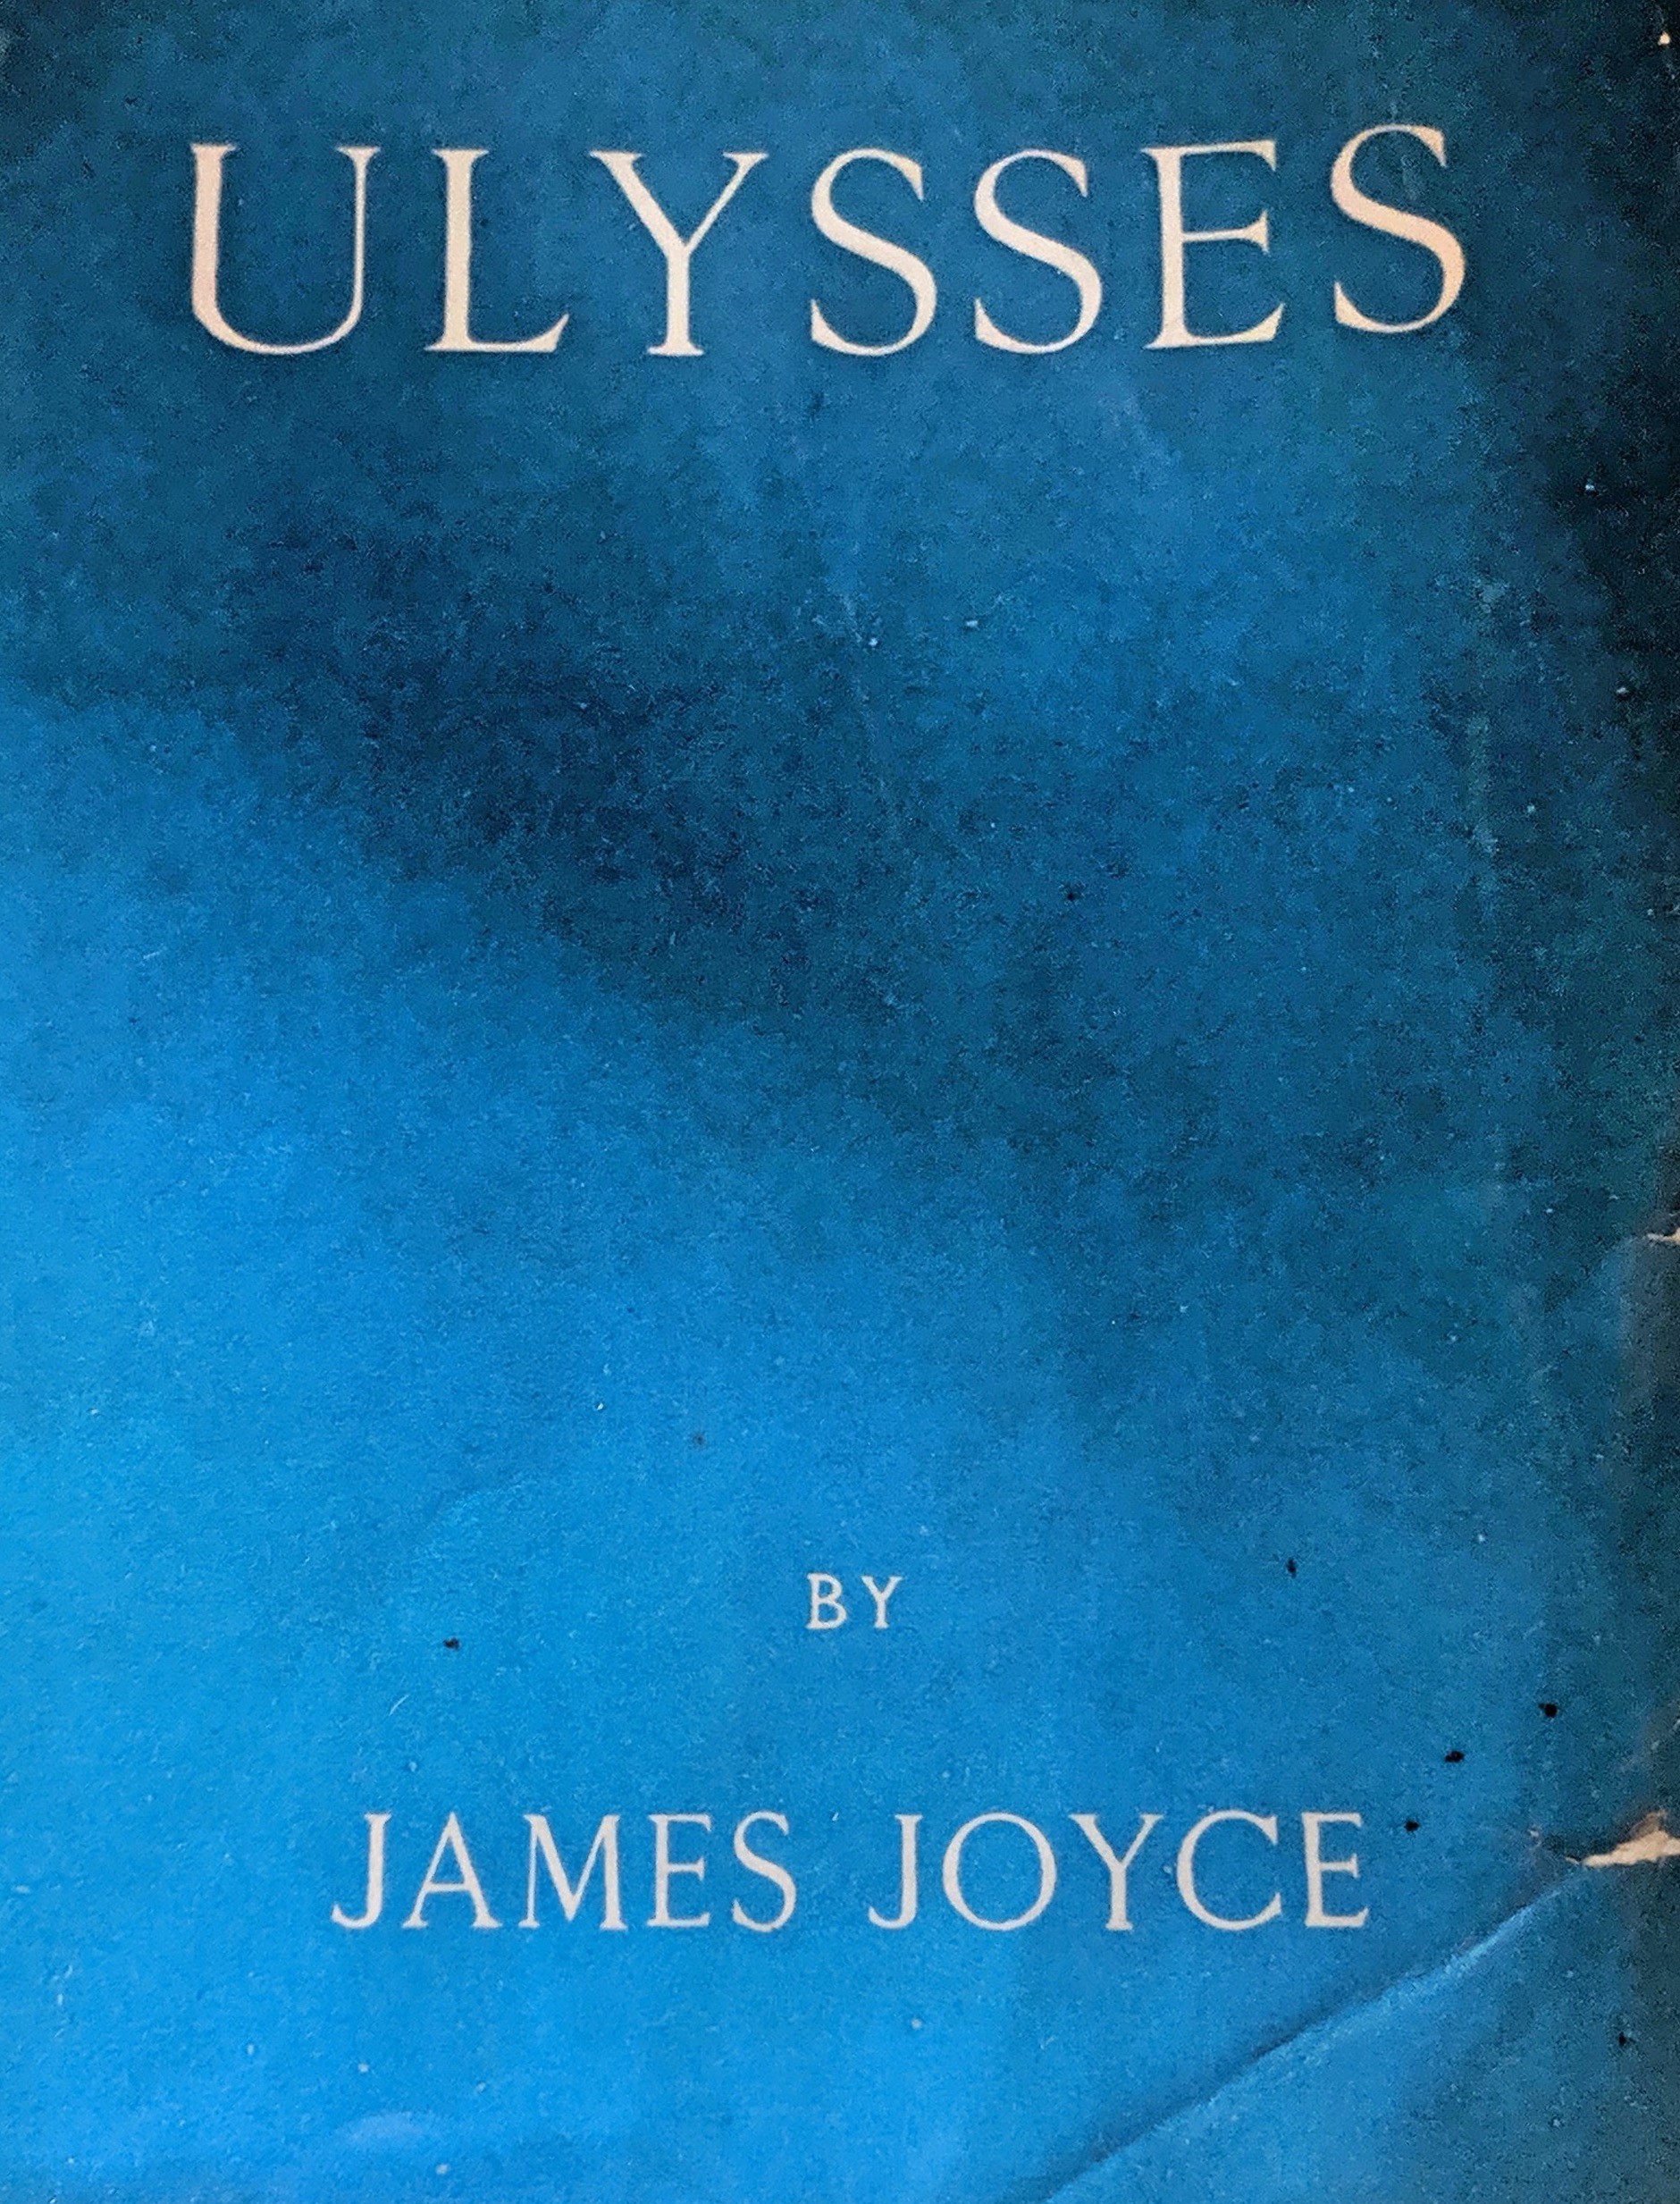 First edition of Ulysses in Greek colours – white letters on a blue background. Image: Anthony Akerman